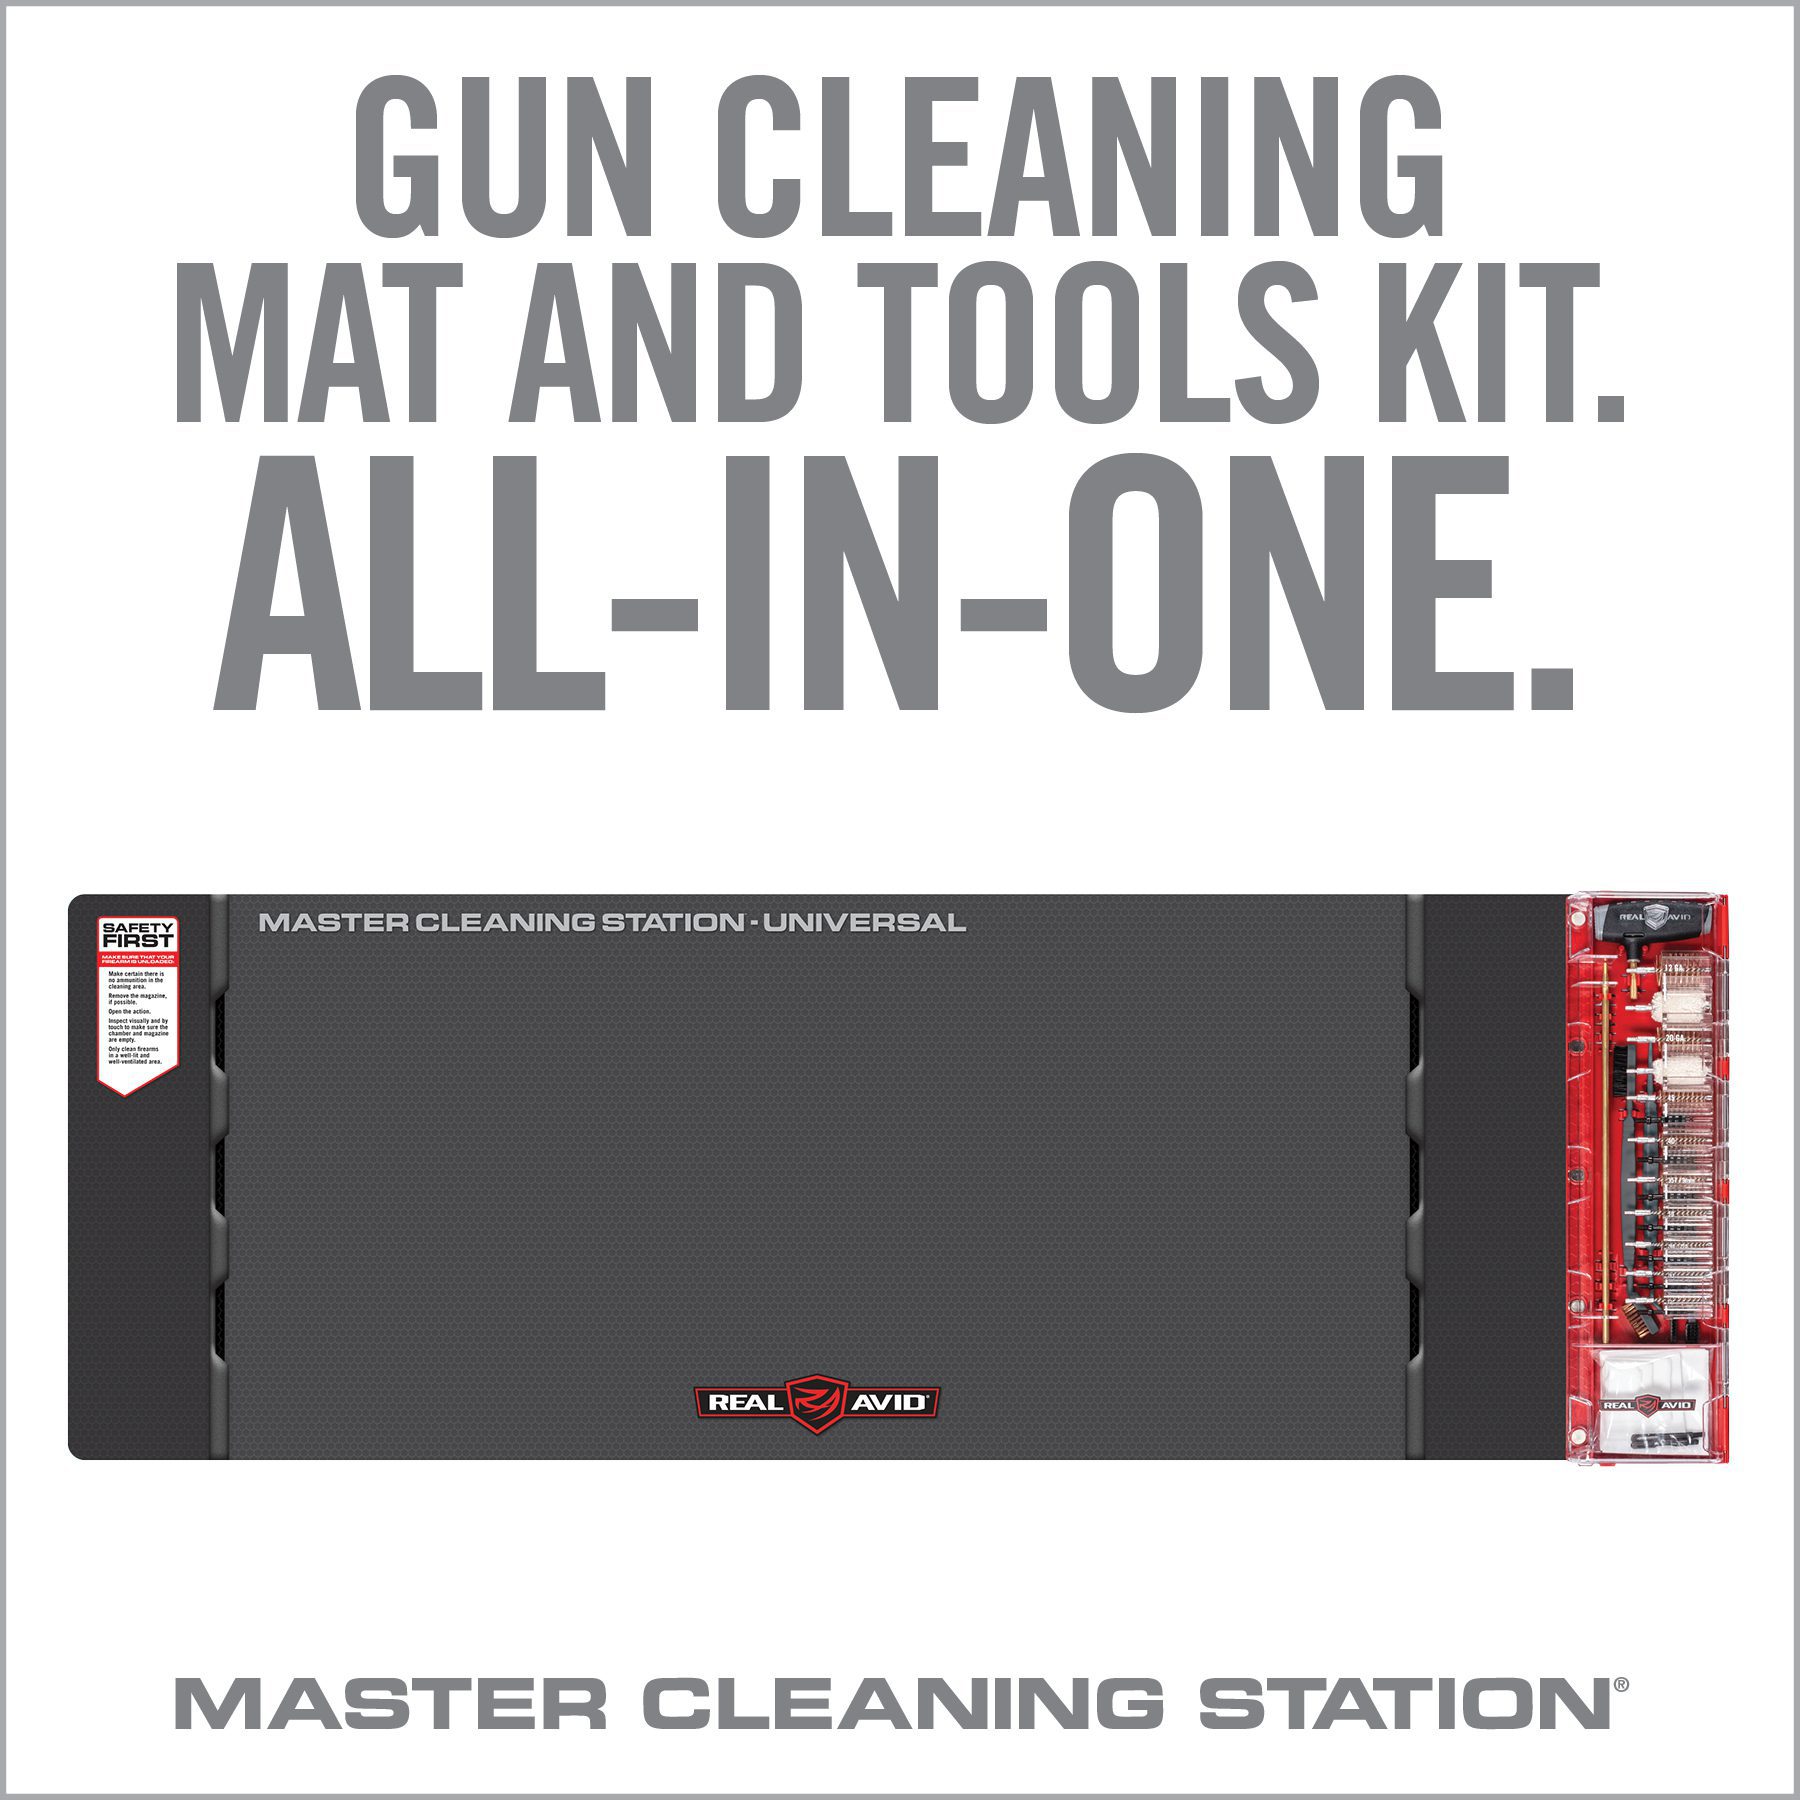 the gun cleaning mat and tools kit all - in - one